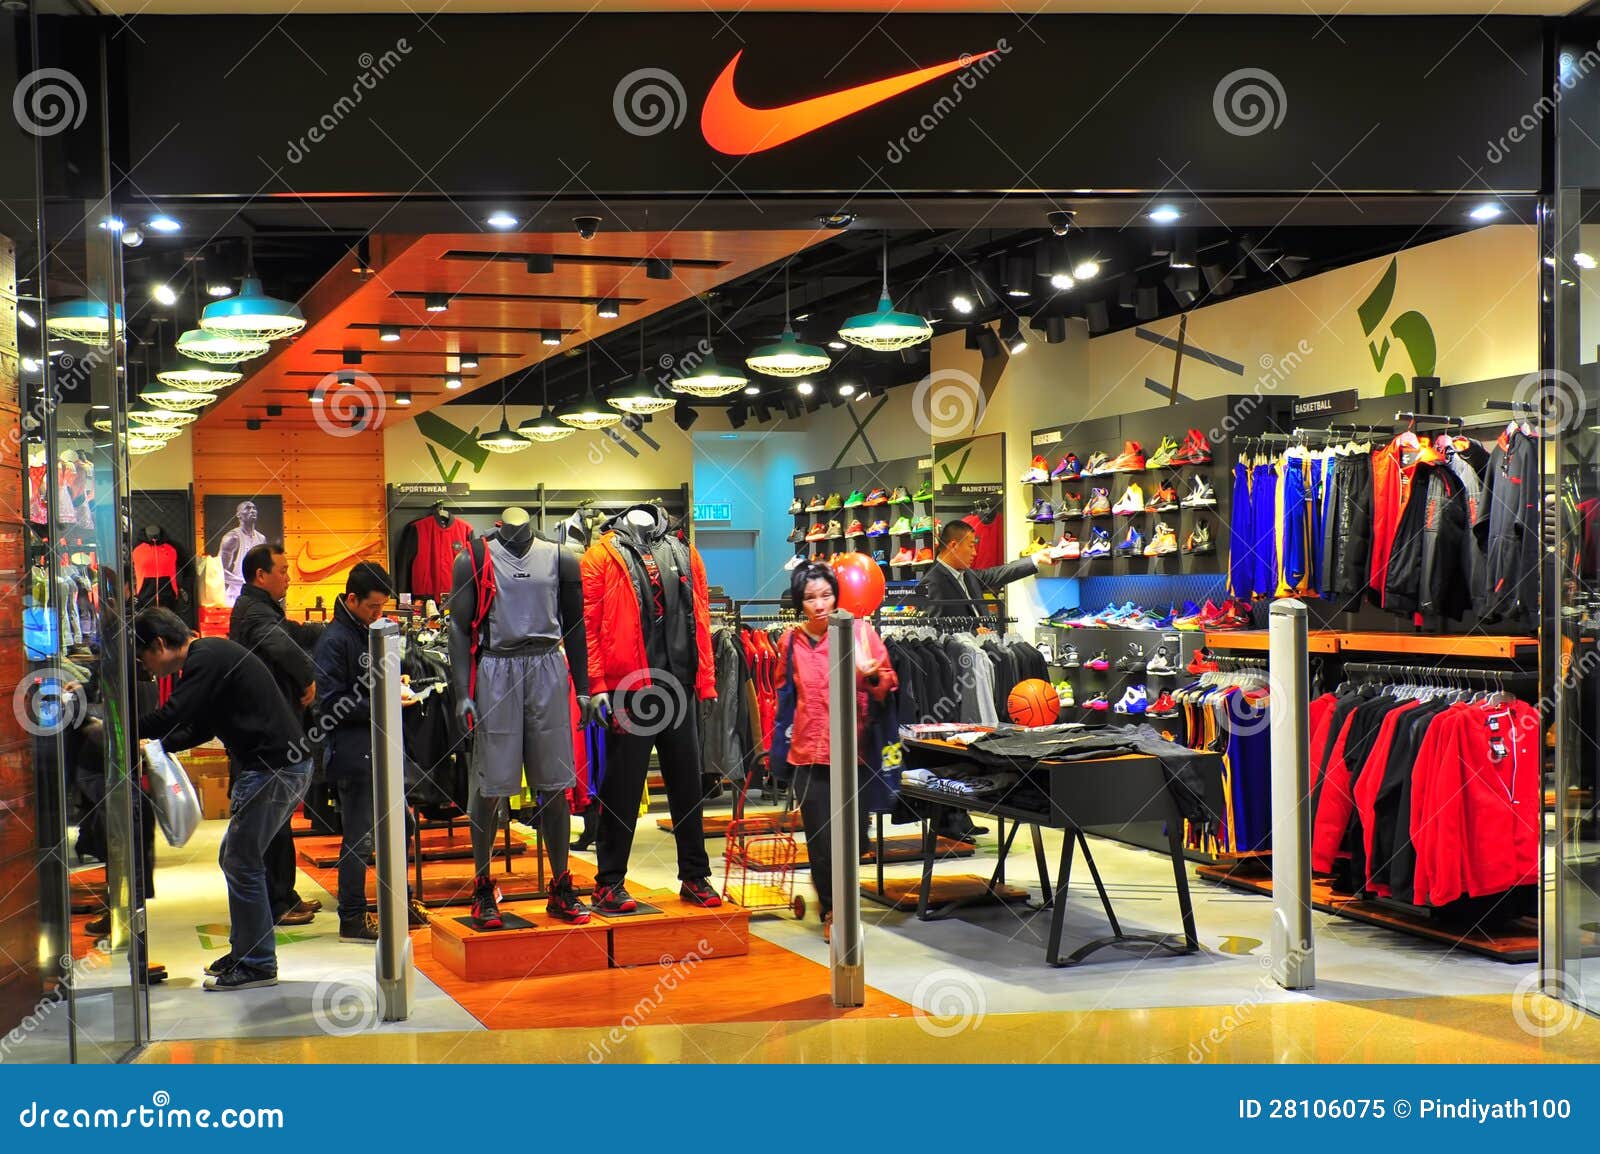 dolphin mall nike outlet